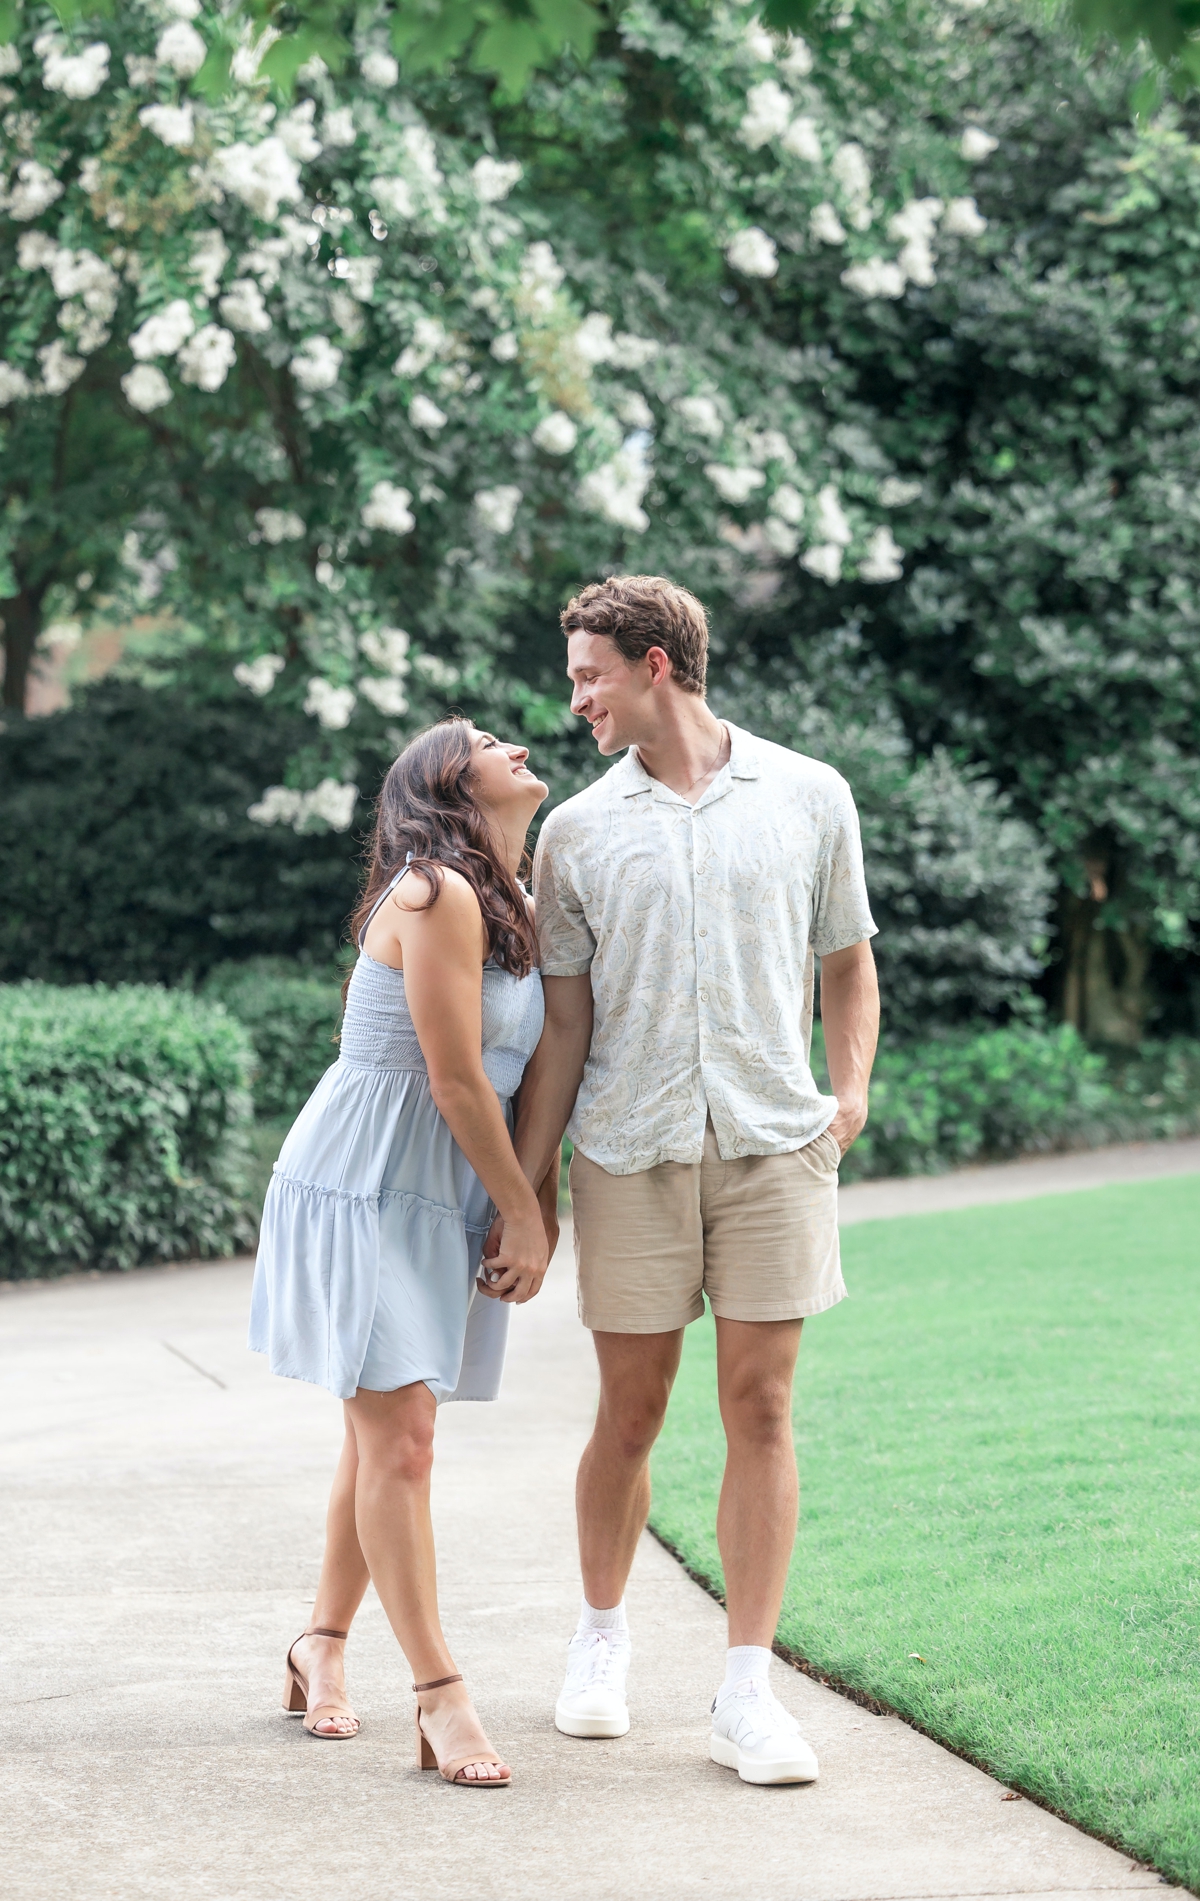 Brooke holding Isaac's hand while she laughs up at him as they walk through Piedmont Park during their portrait session.